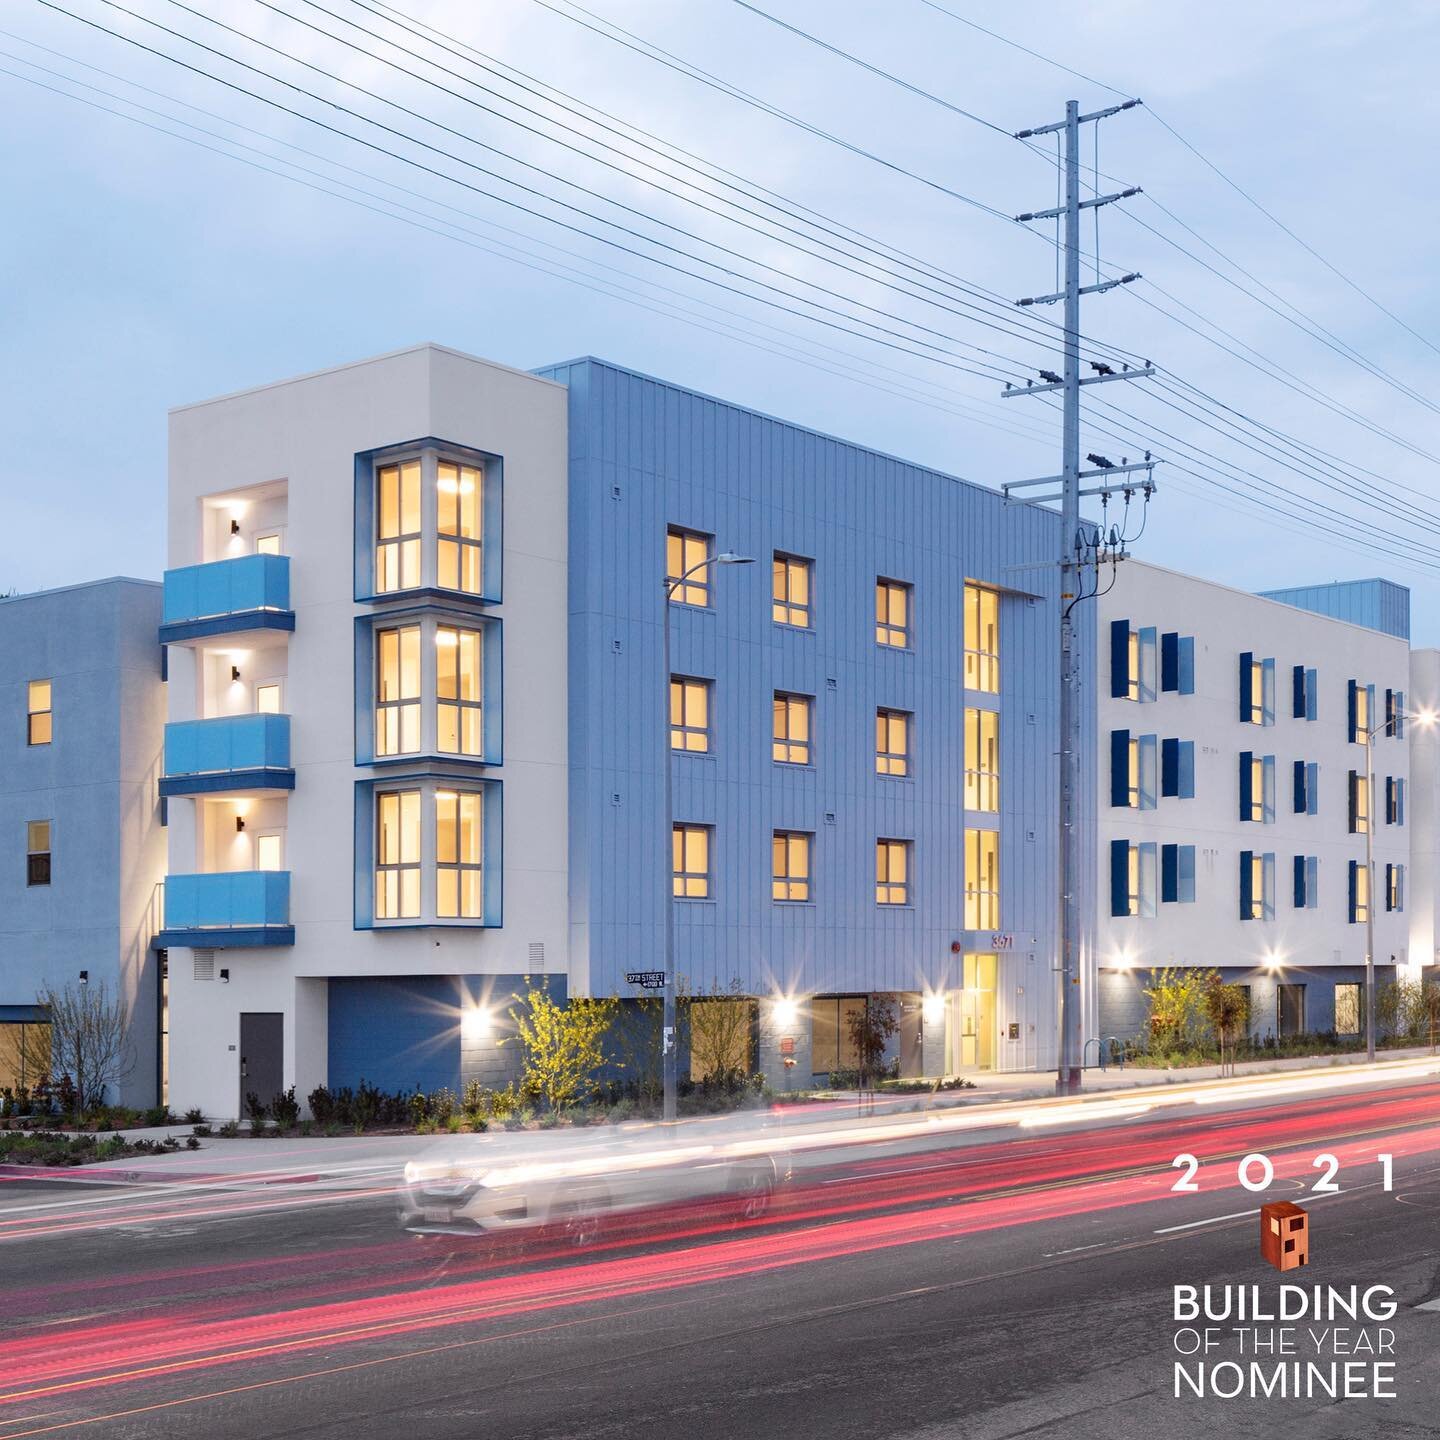 Metro at Western was nominated for the  2021 ArchDaily Building of the Year! Be sure to vote at the link in our bio before 9pm this evening. #archdaily #awards #architecture #design #buildingoftheyear2021 #affordablehousing @archdaily